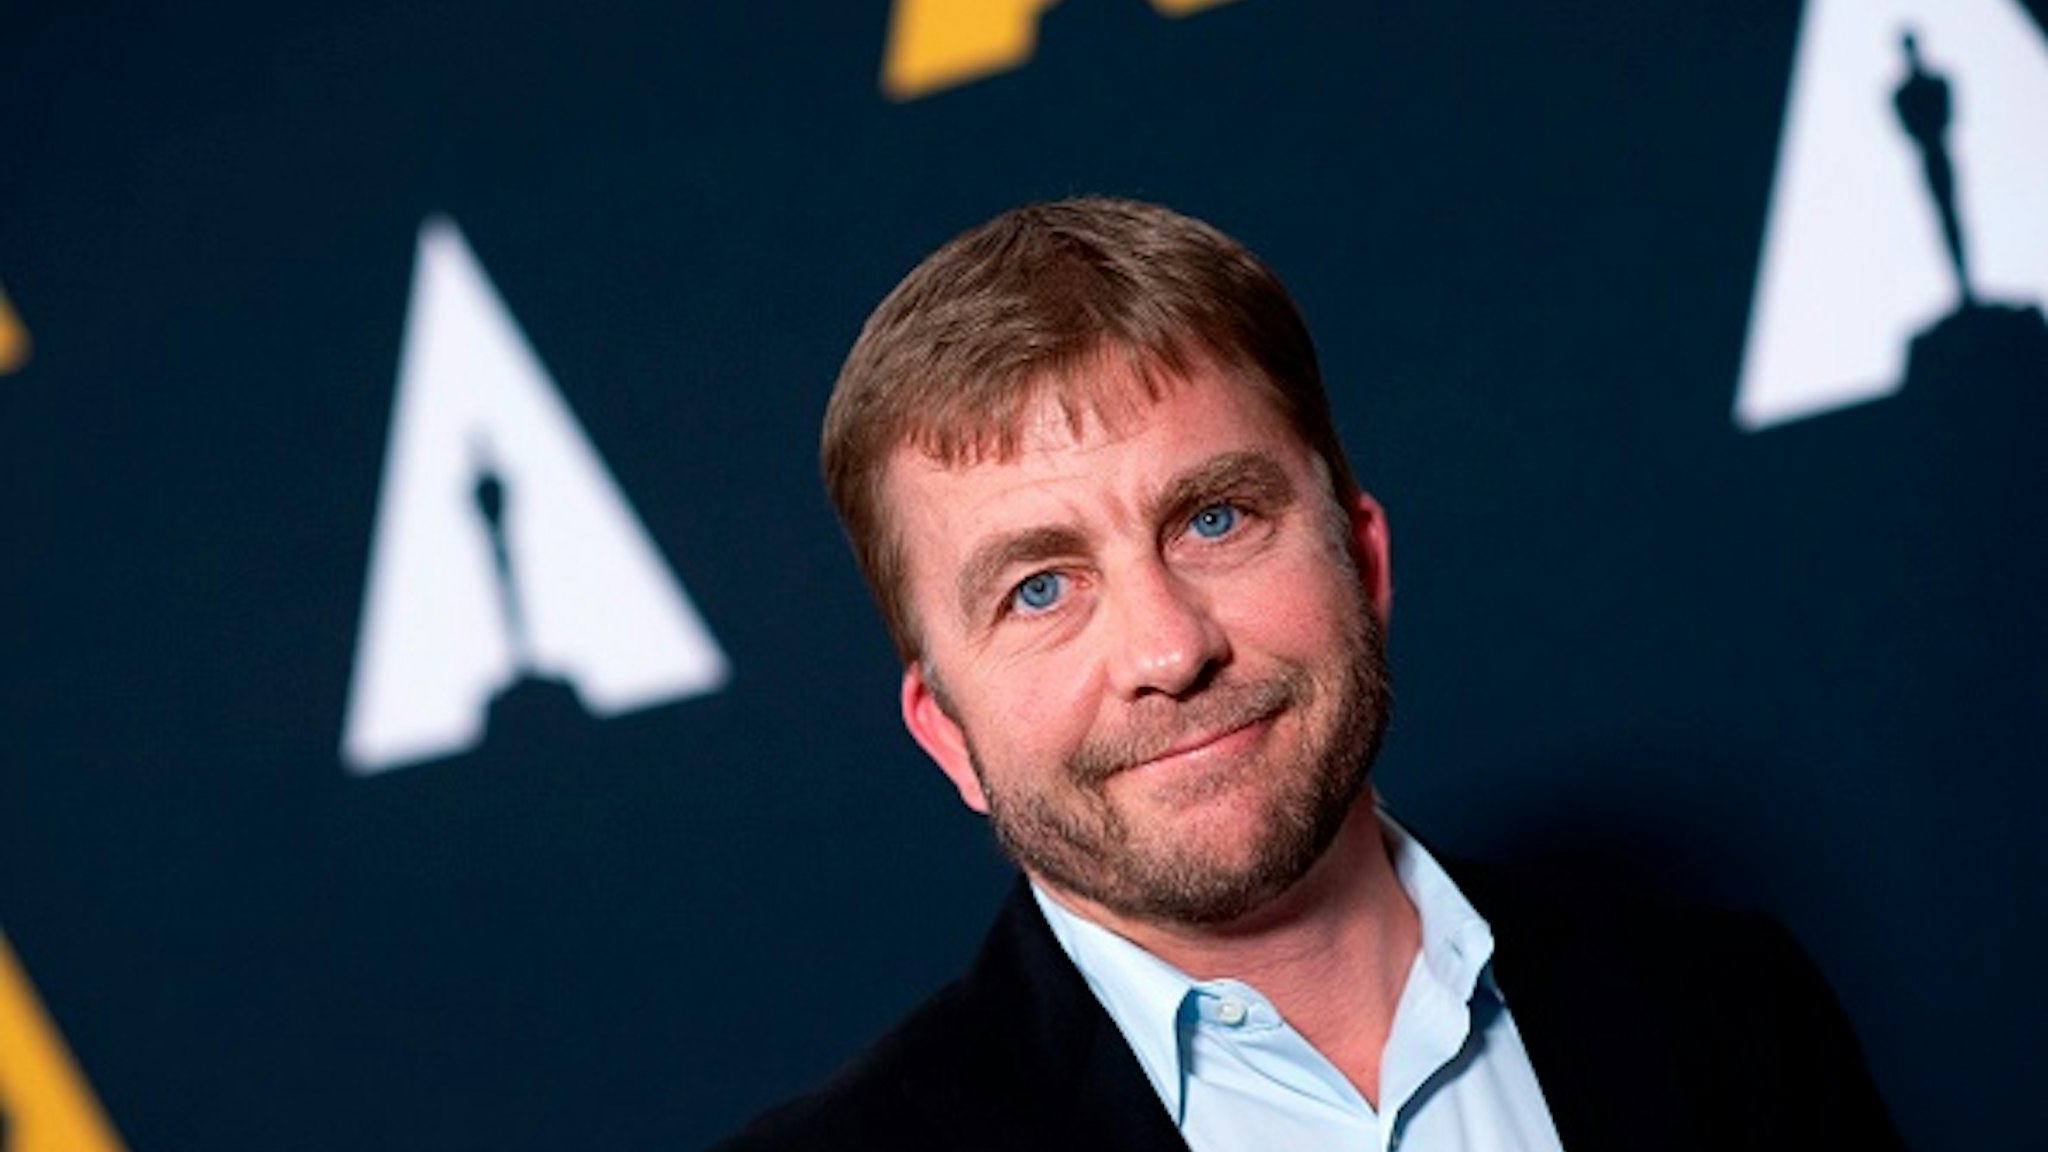 Actor Peter Billingsley attends the Academy Celebrates "A Christmas Story" 35TH Anniversary at the Academy of Motion Pictures Arts and Sciences, in Beverly Hills, California, on December 10, 2018.